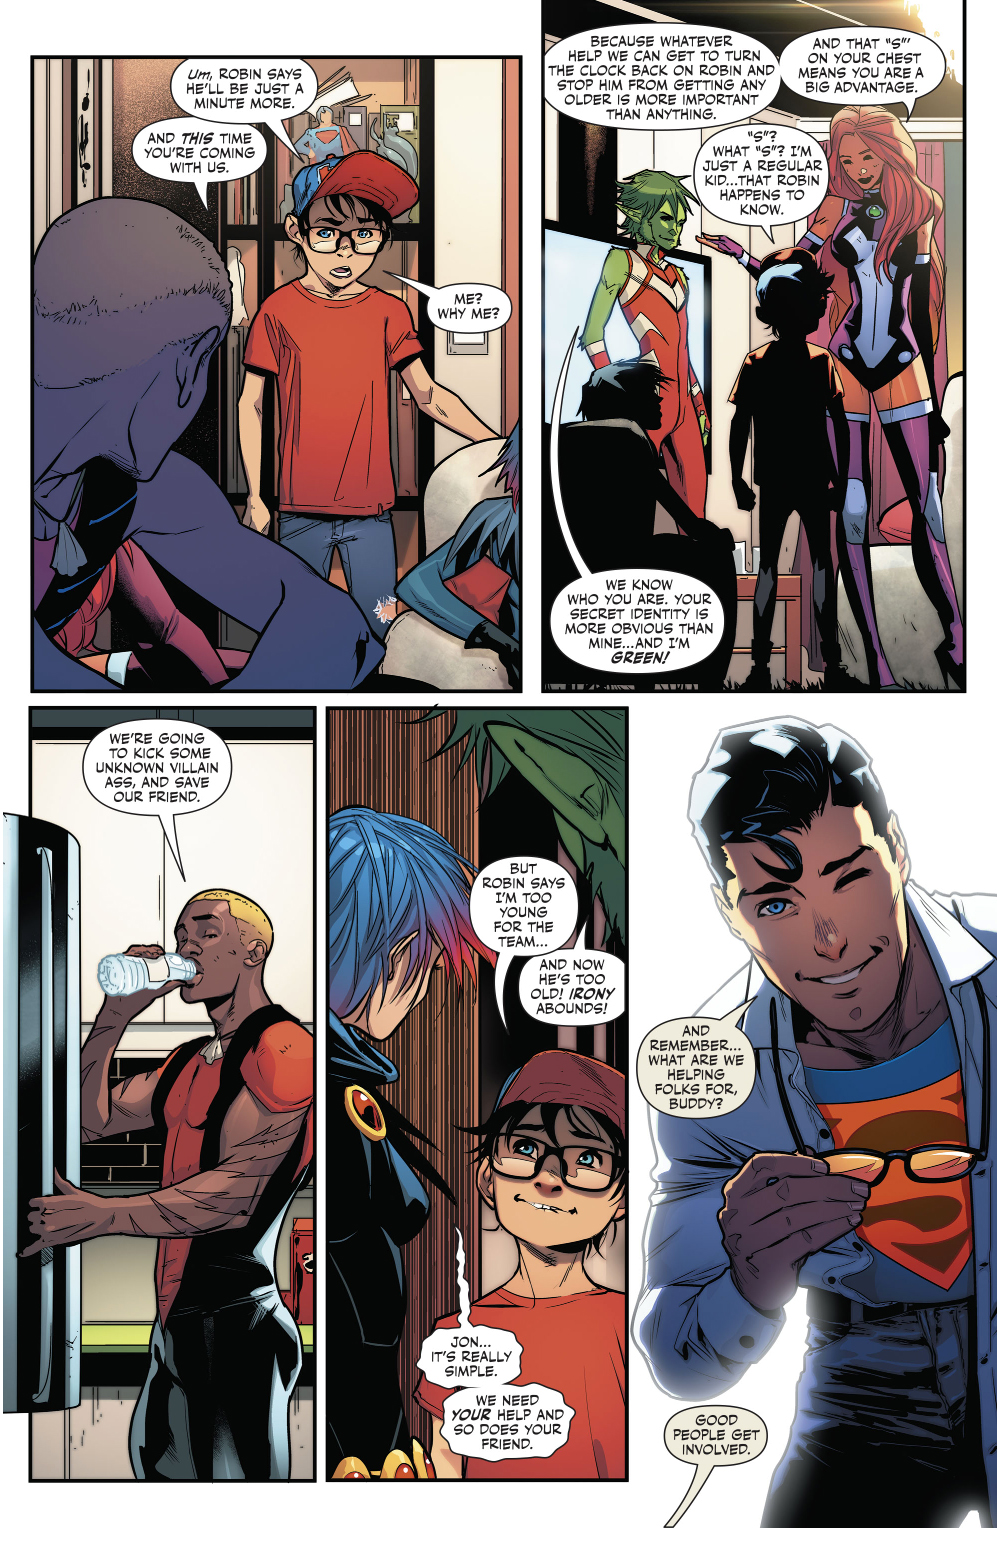 Superboy Joins The Teen Titans (Rebirth) 